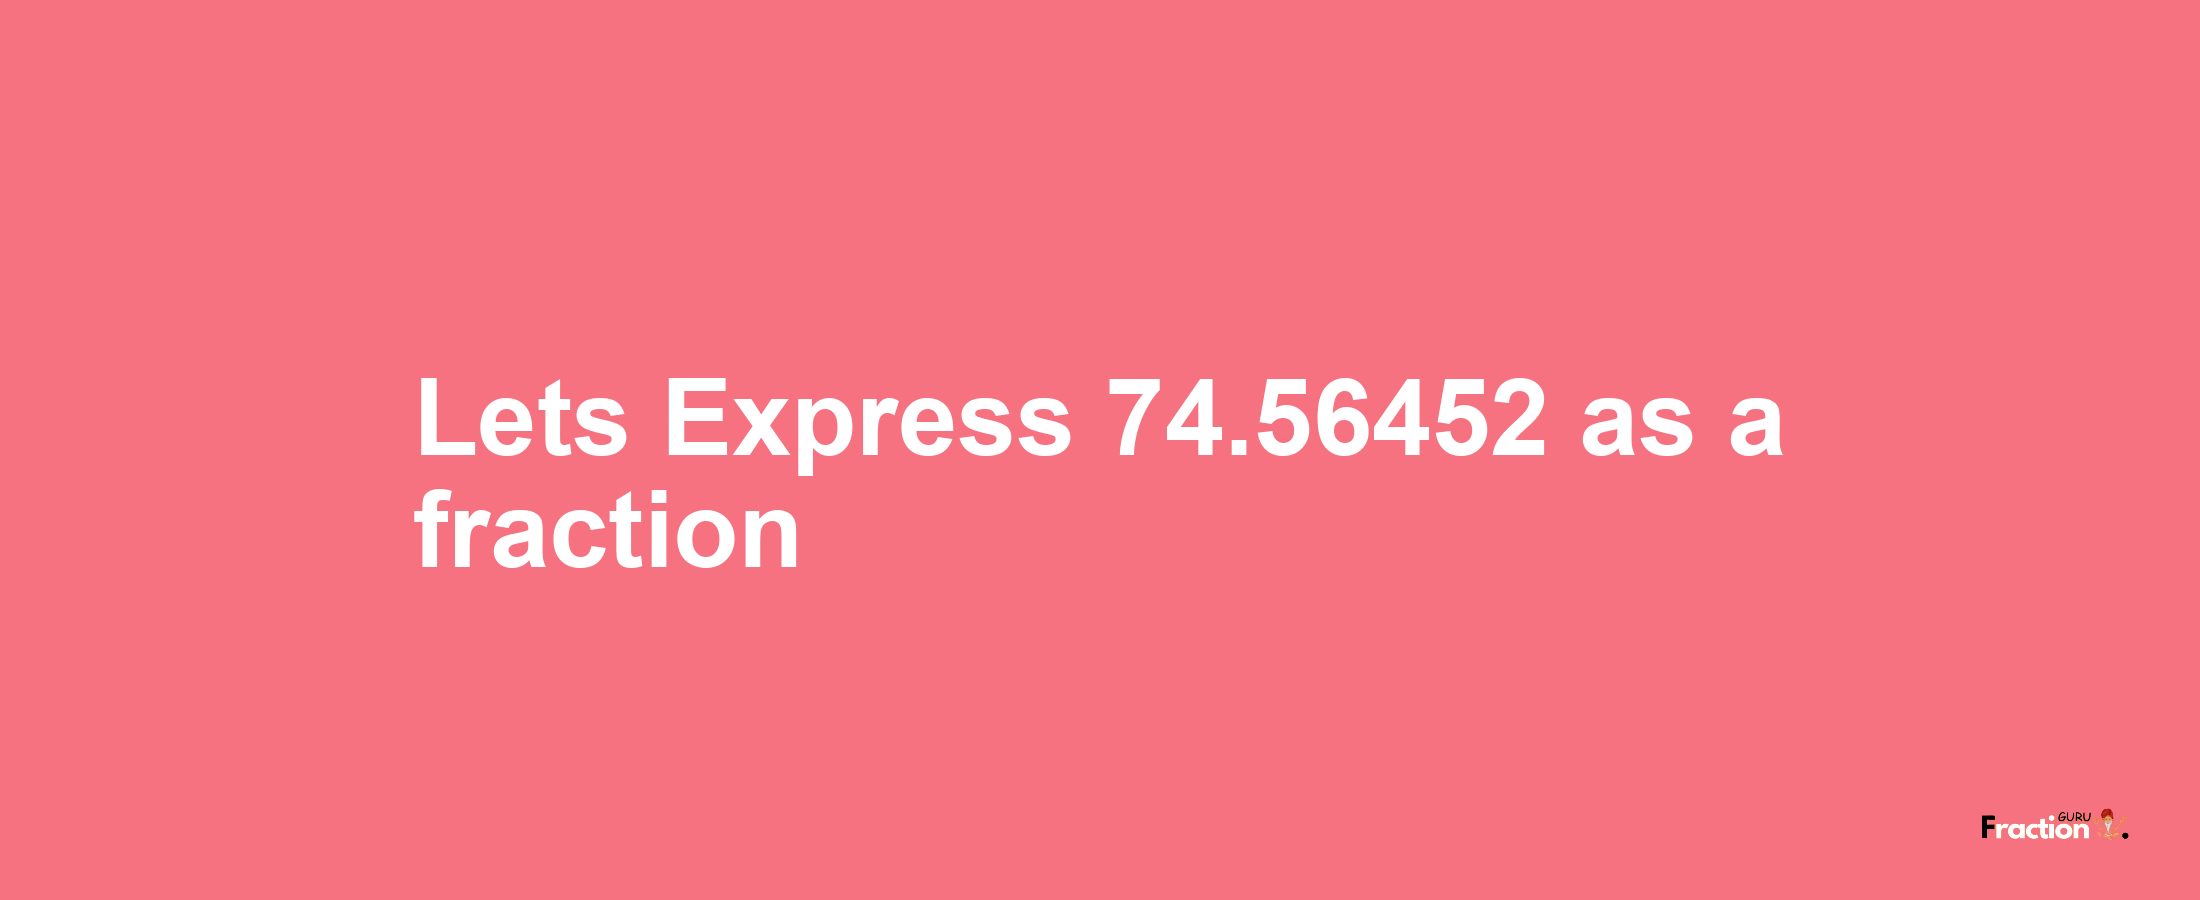 Lets Express 74.56452 as afraction